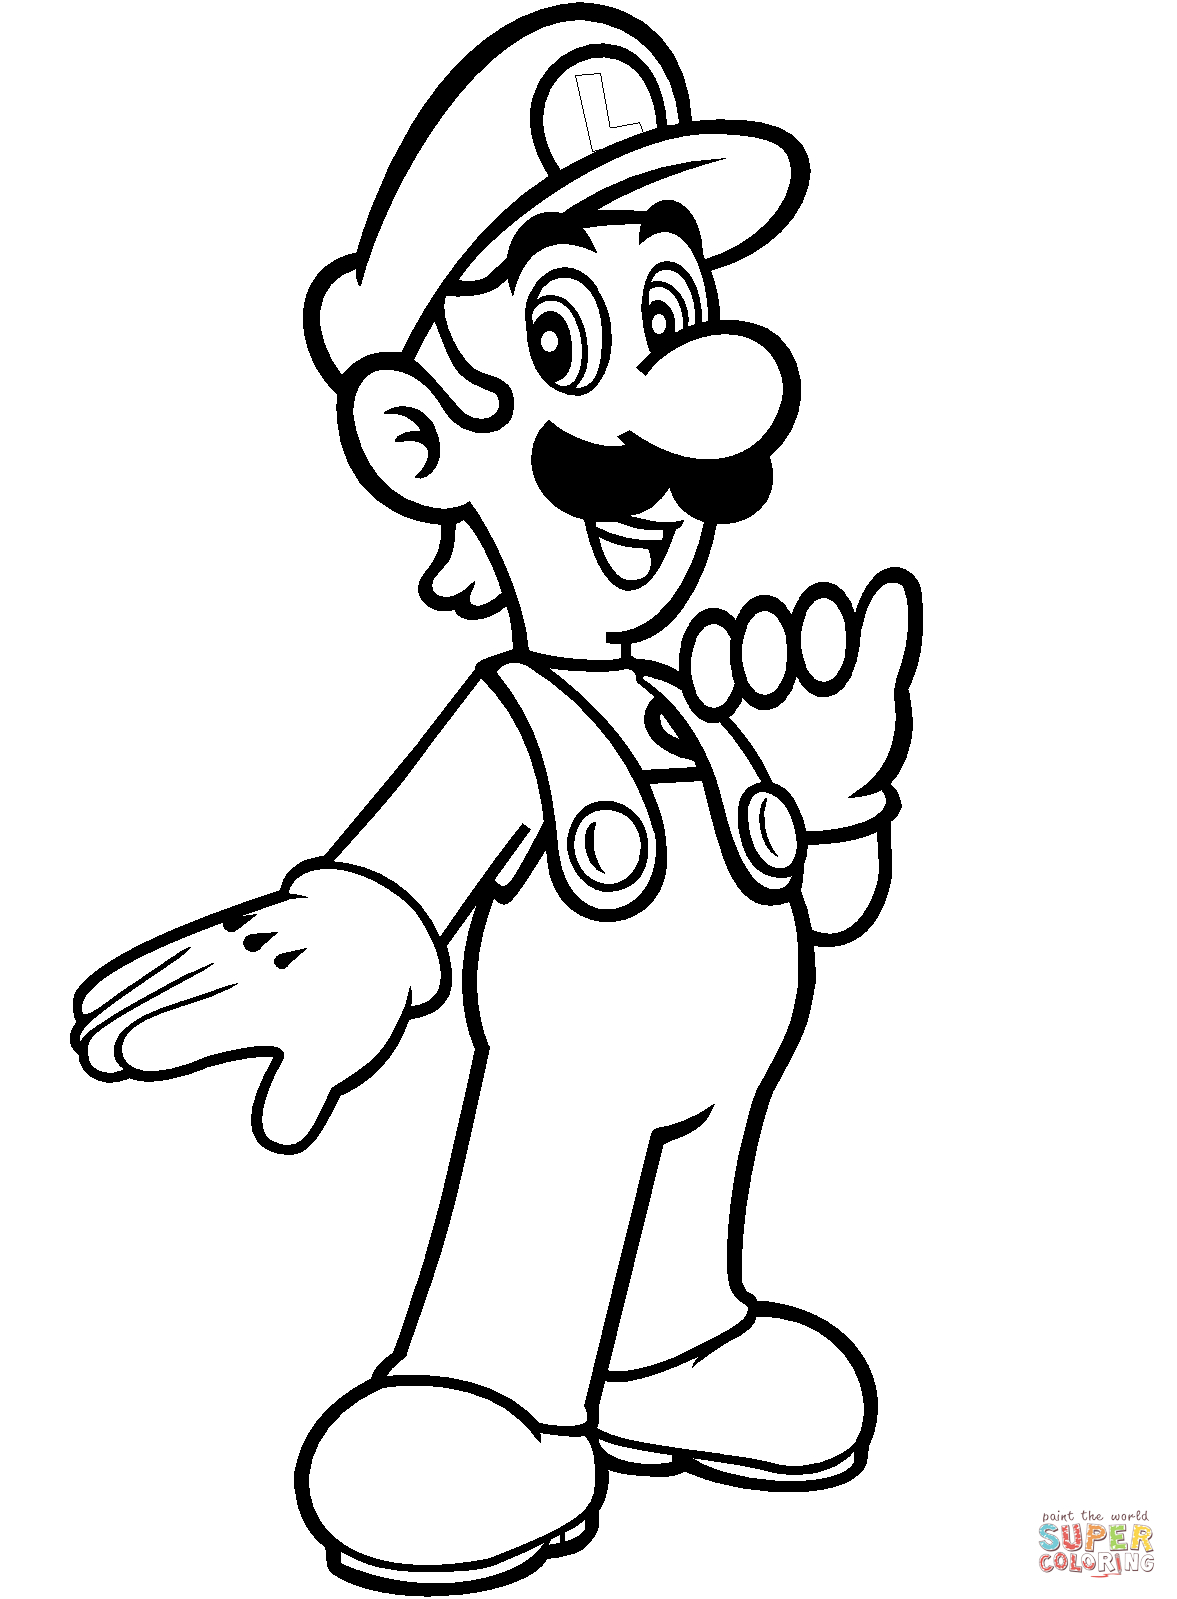 Peach From Mario Coloring Pages Coloring Pages Super Marioros Coloringook Pages Animals For Kids